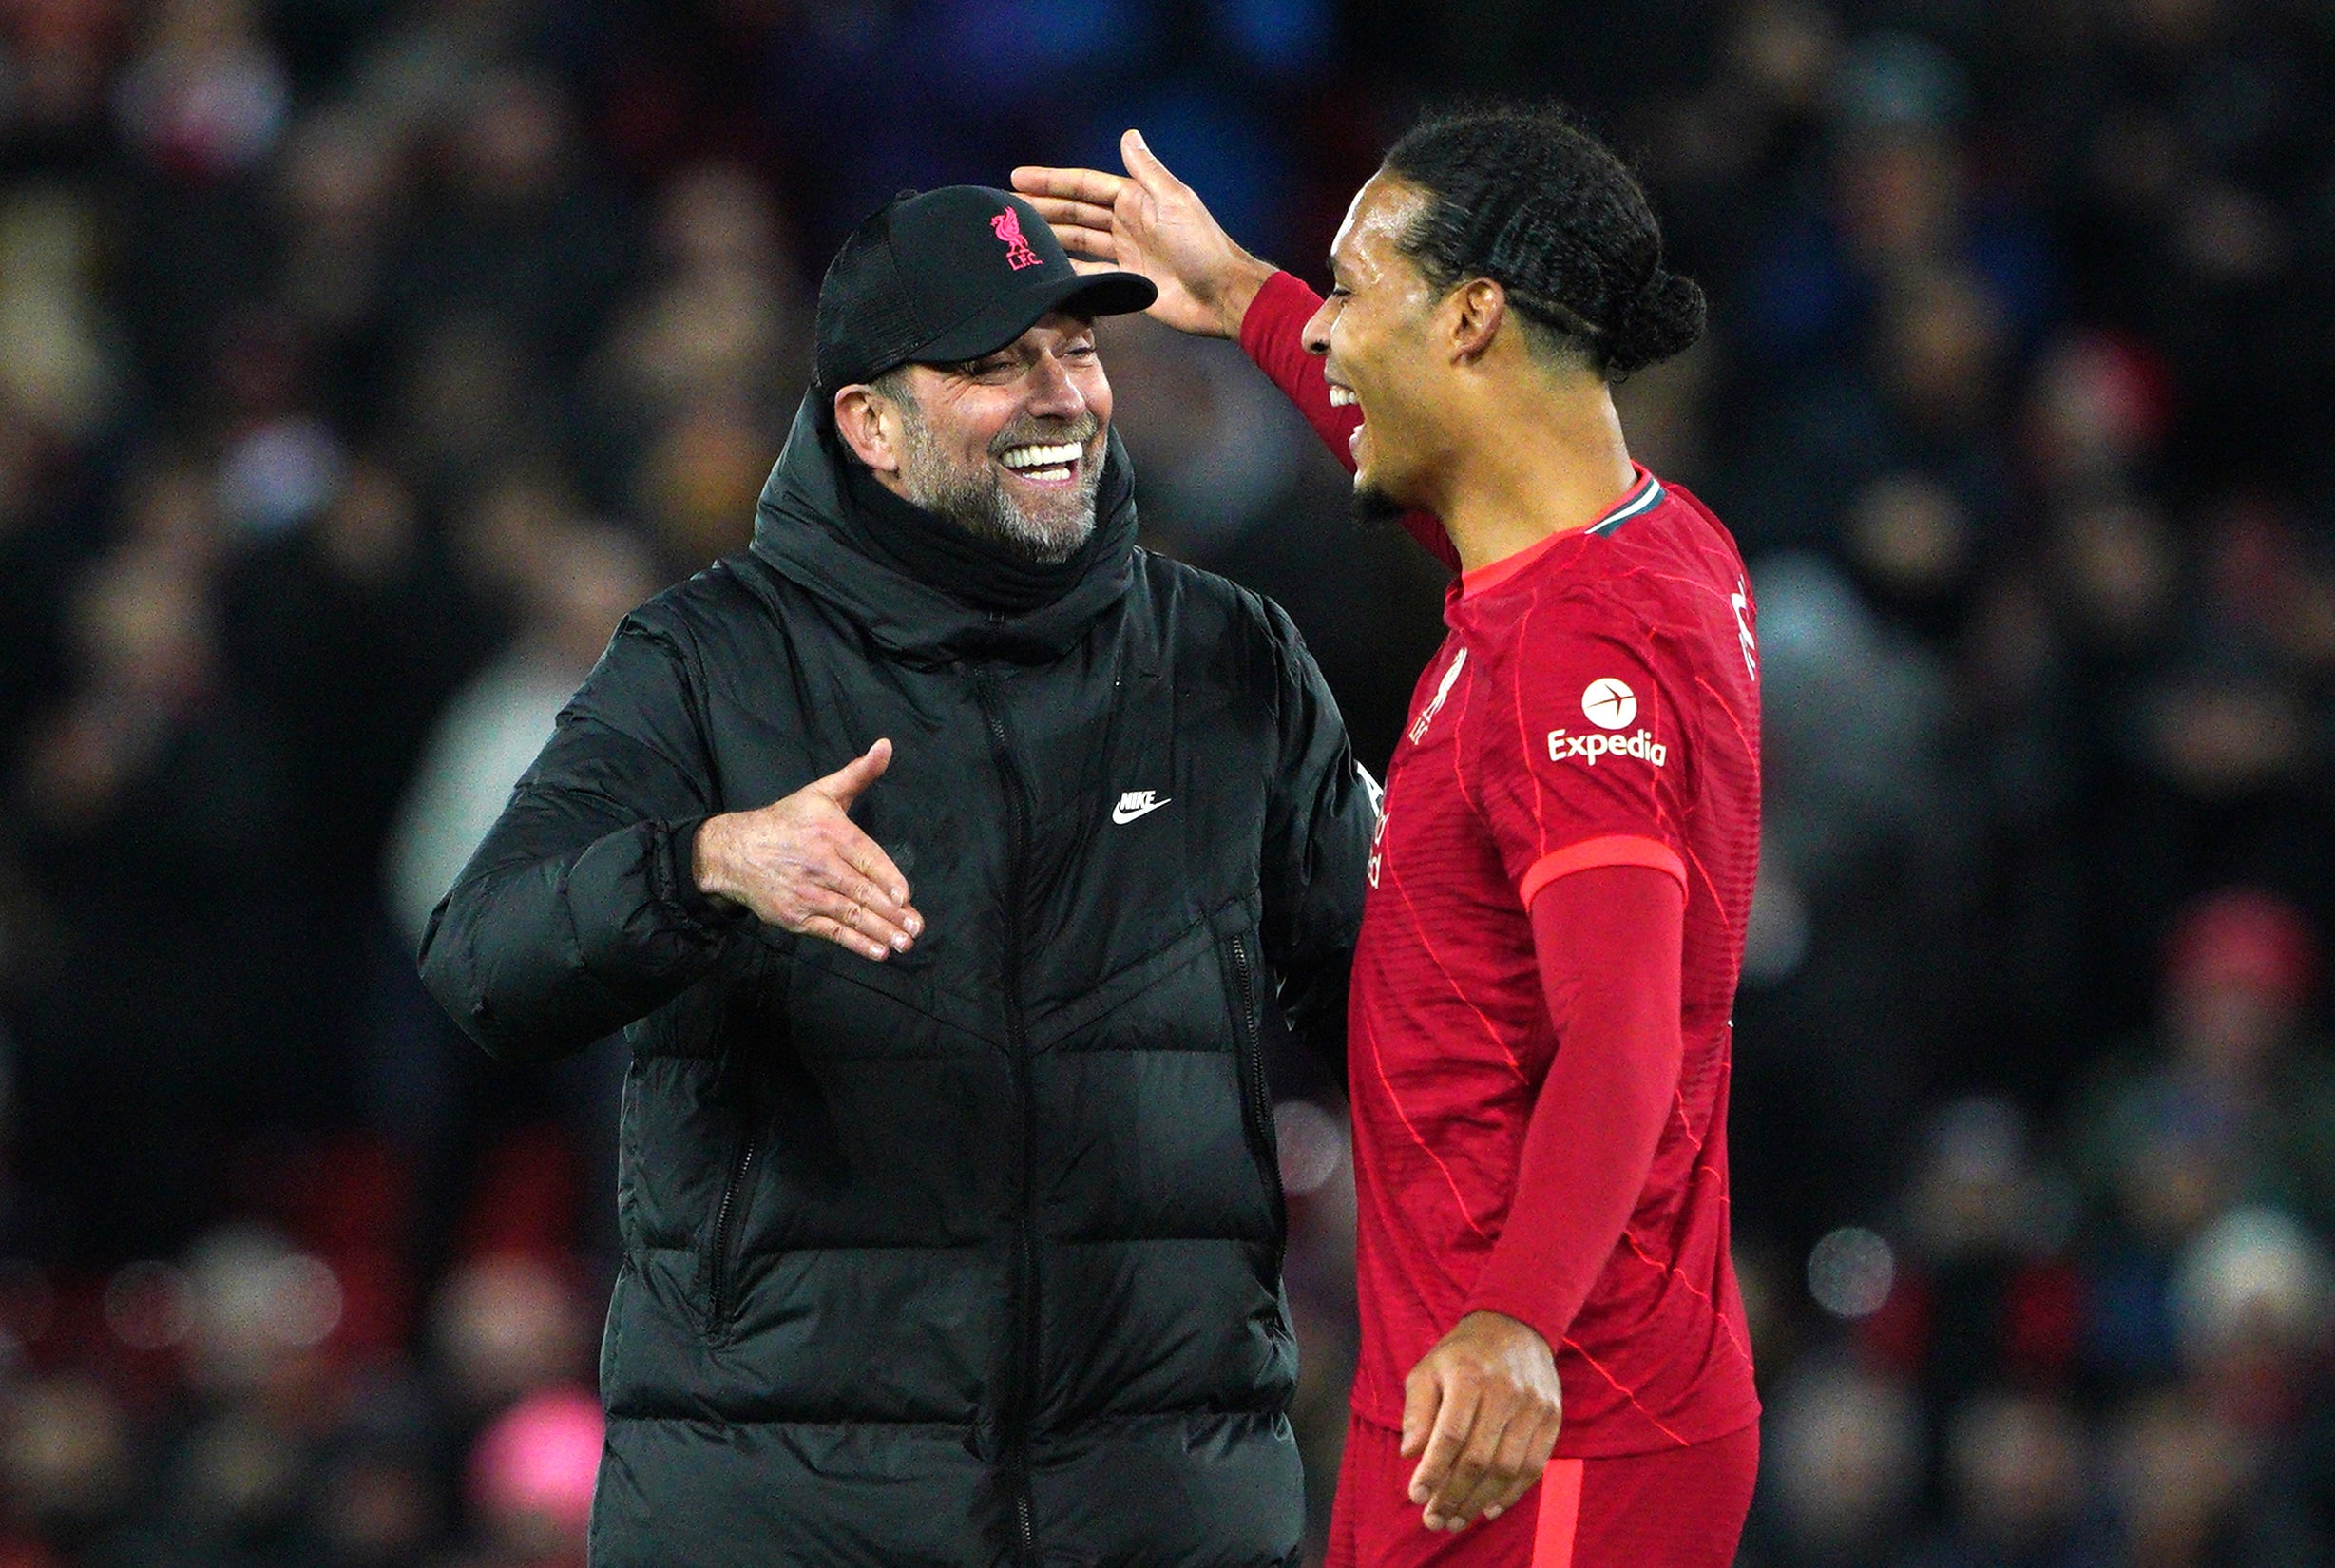 virgil van dijk committed to liverpool and ‘excited’ for transition after jurgen klopp exit